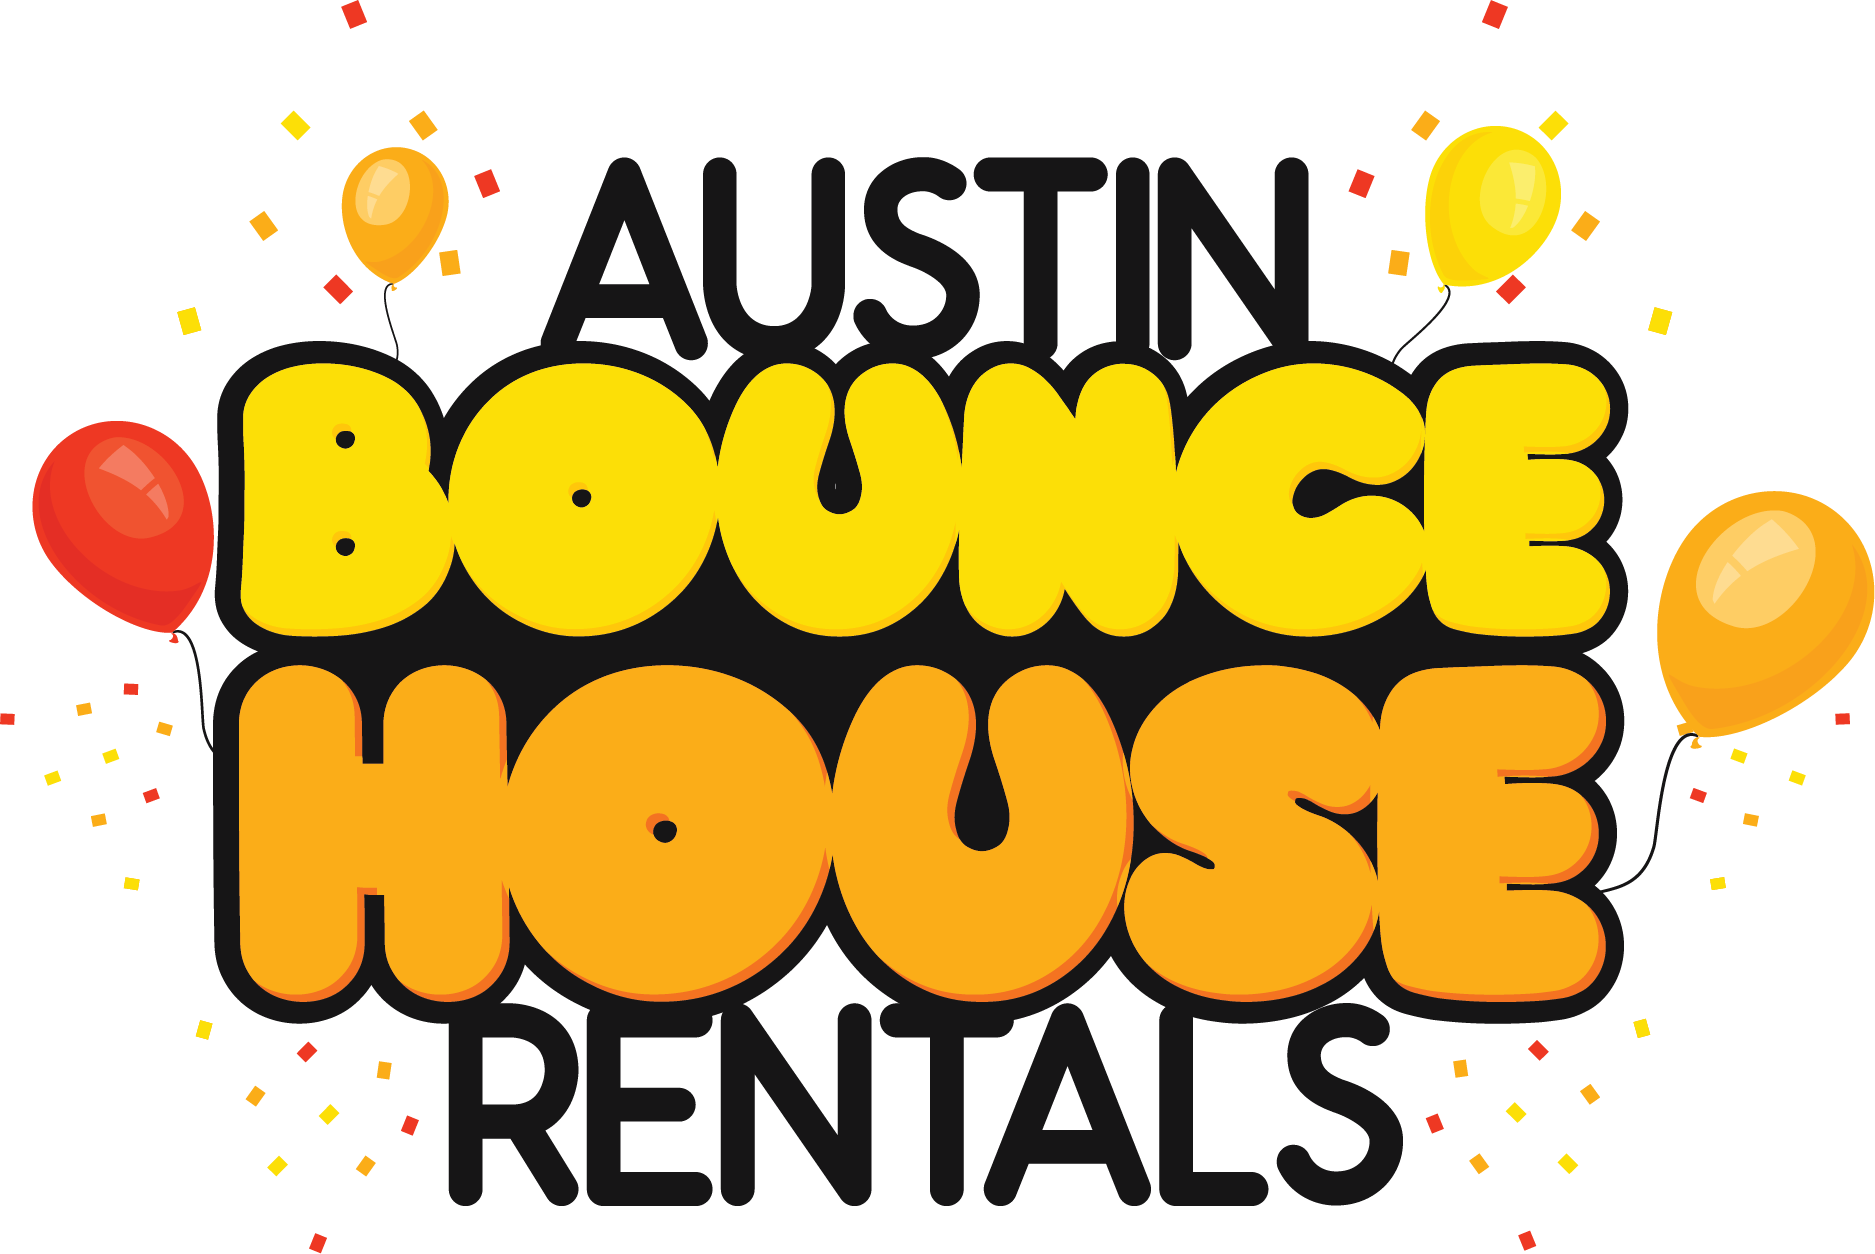 Party Rentals Your Way - Austin Bounce House Rentals Logo (1875x1254)